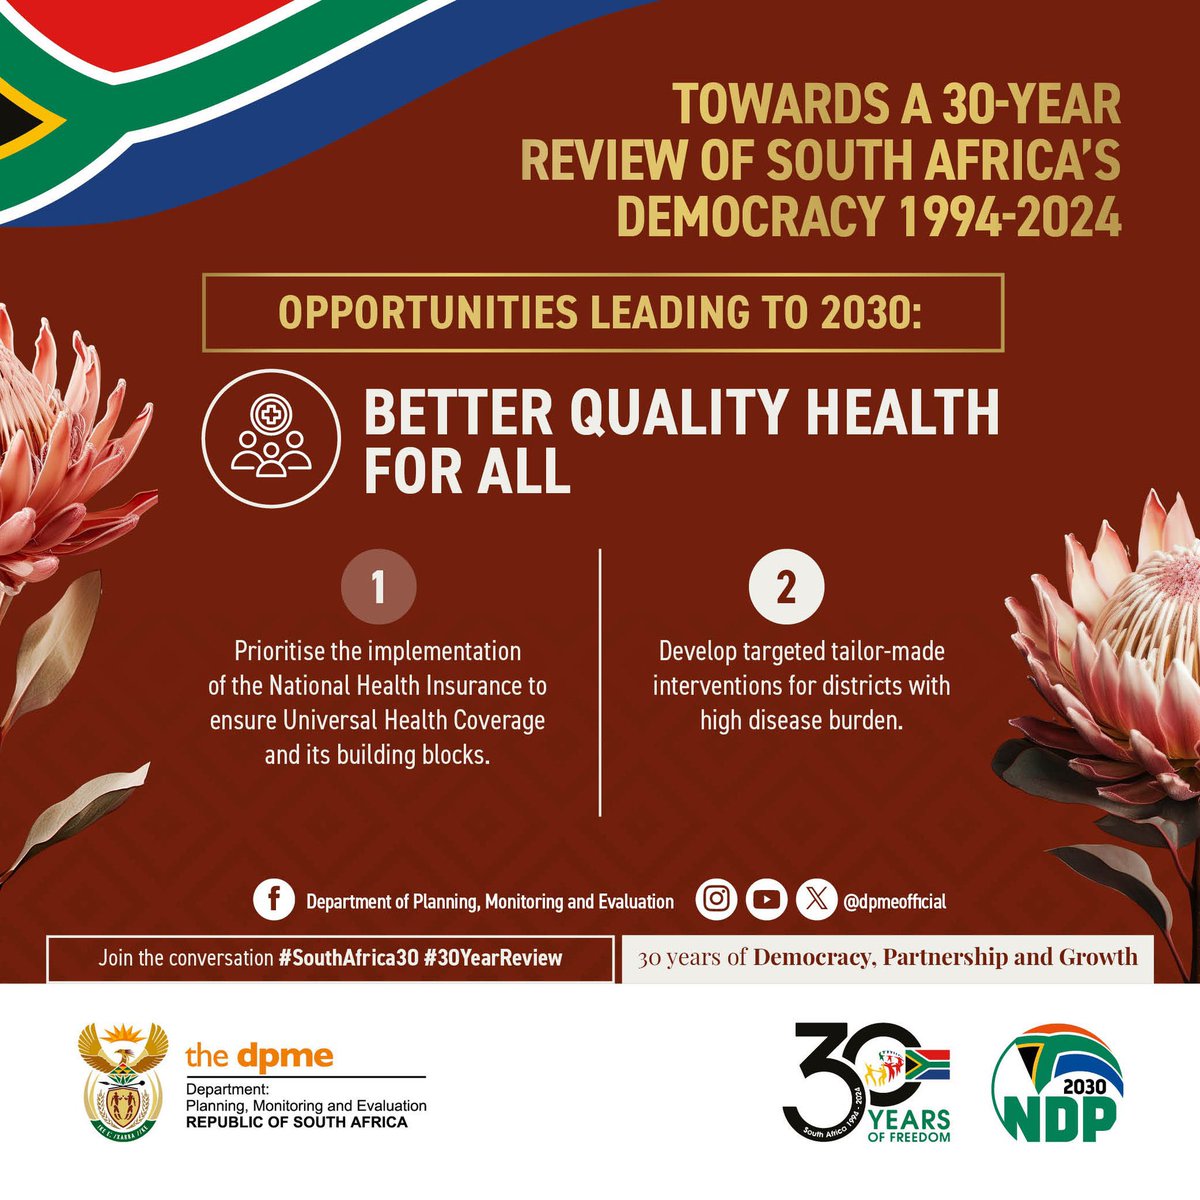 #30YearReview report: CHAPTER 8: BETTER QUALITY HEALTH FOR ALL Read the report here: online.fliphtml5.com/xdpr/rmgt/#p=8 #SouthAfrica30 🇿🇦 #NHIBill #NHIAct #LeaveNoOneBehind 🇿🇦